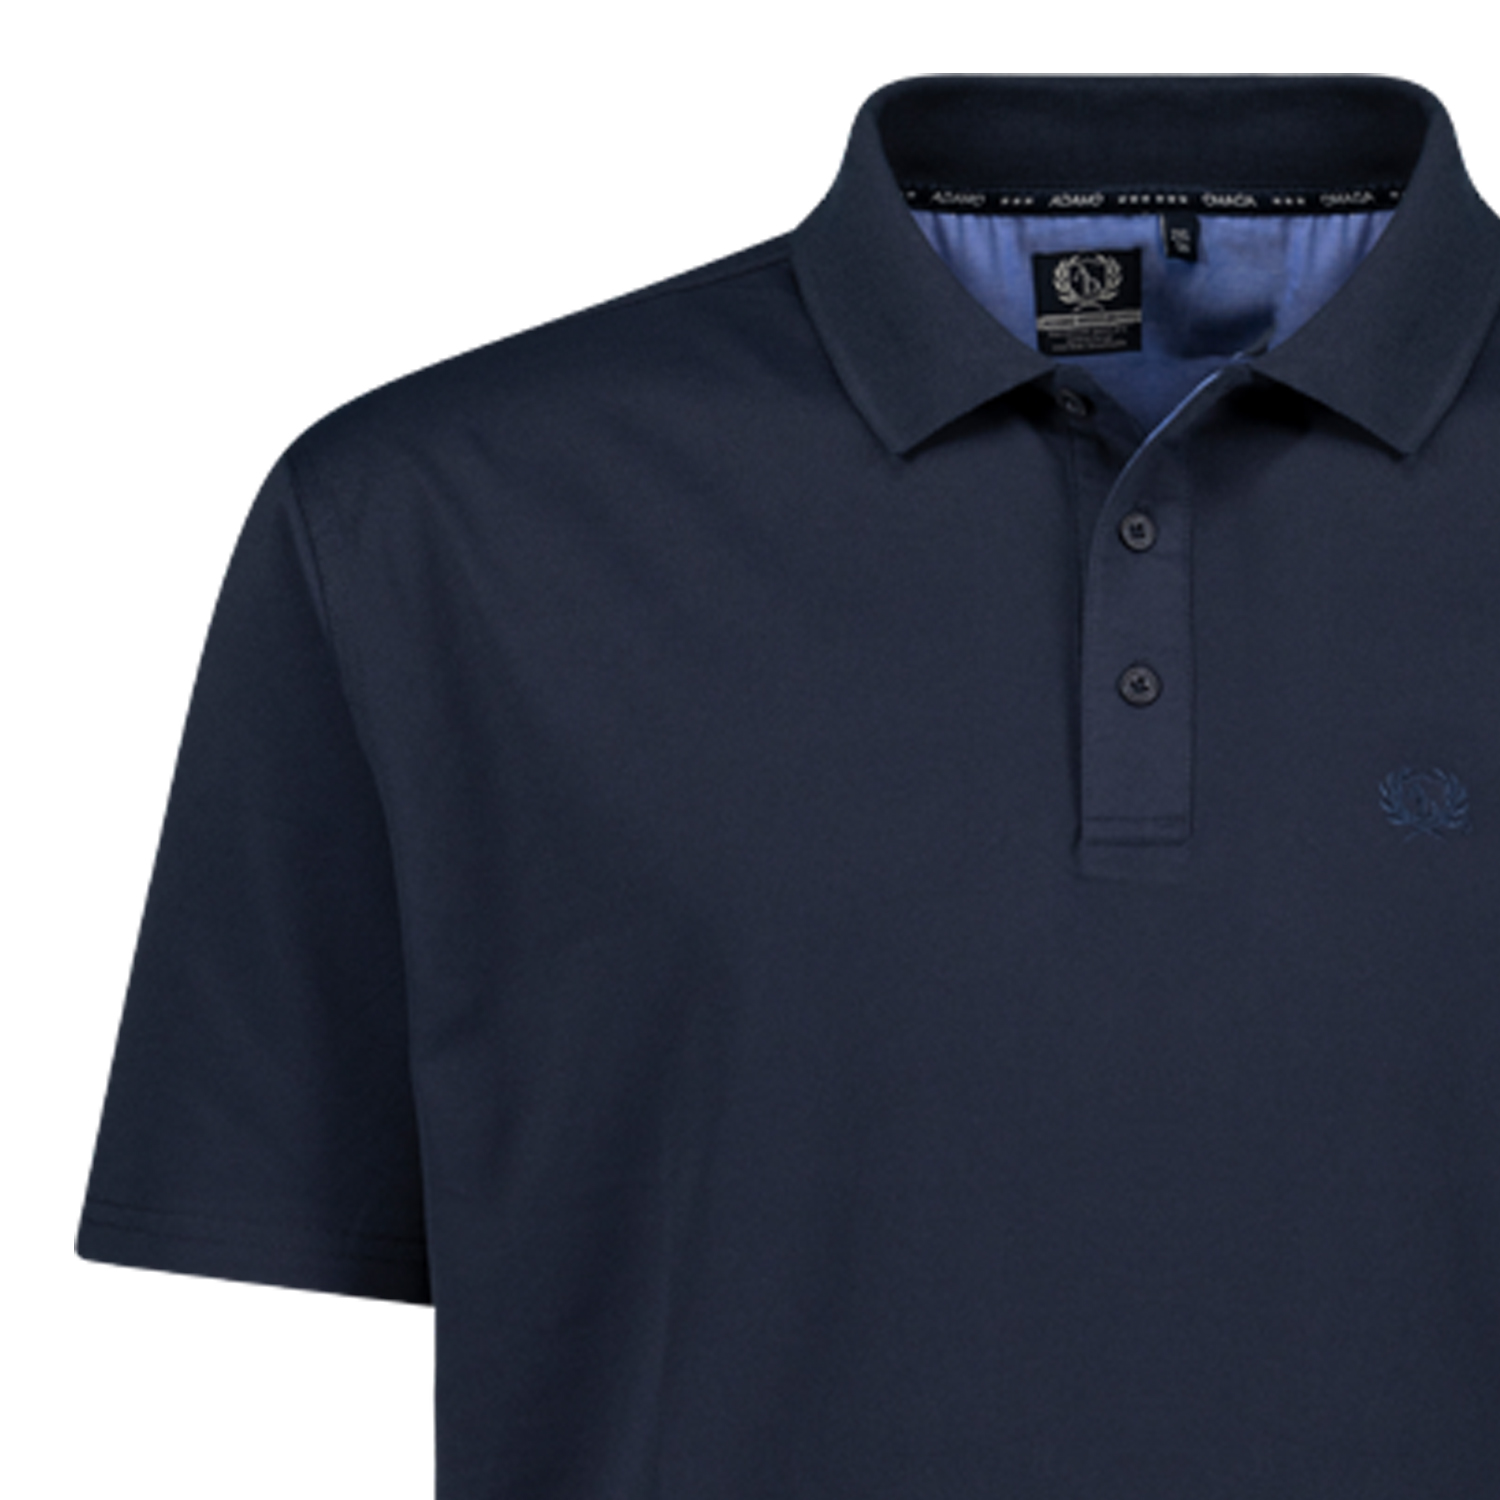 Short sleeve polo shirt PICCO navy by ADAMO for men in large sizes up to 12XL